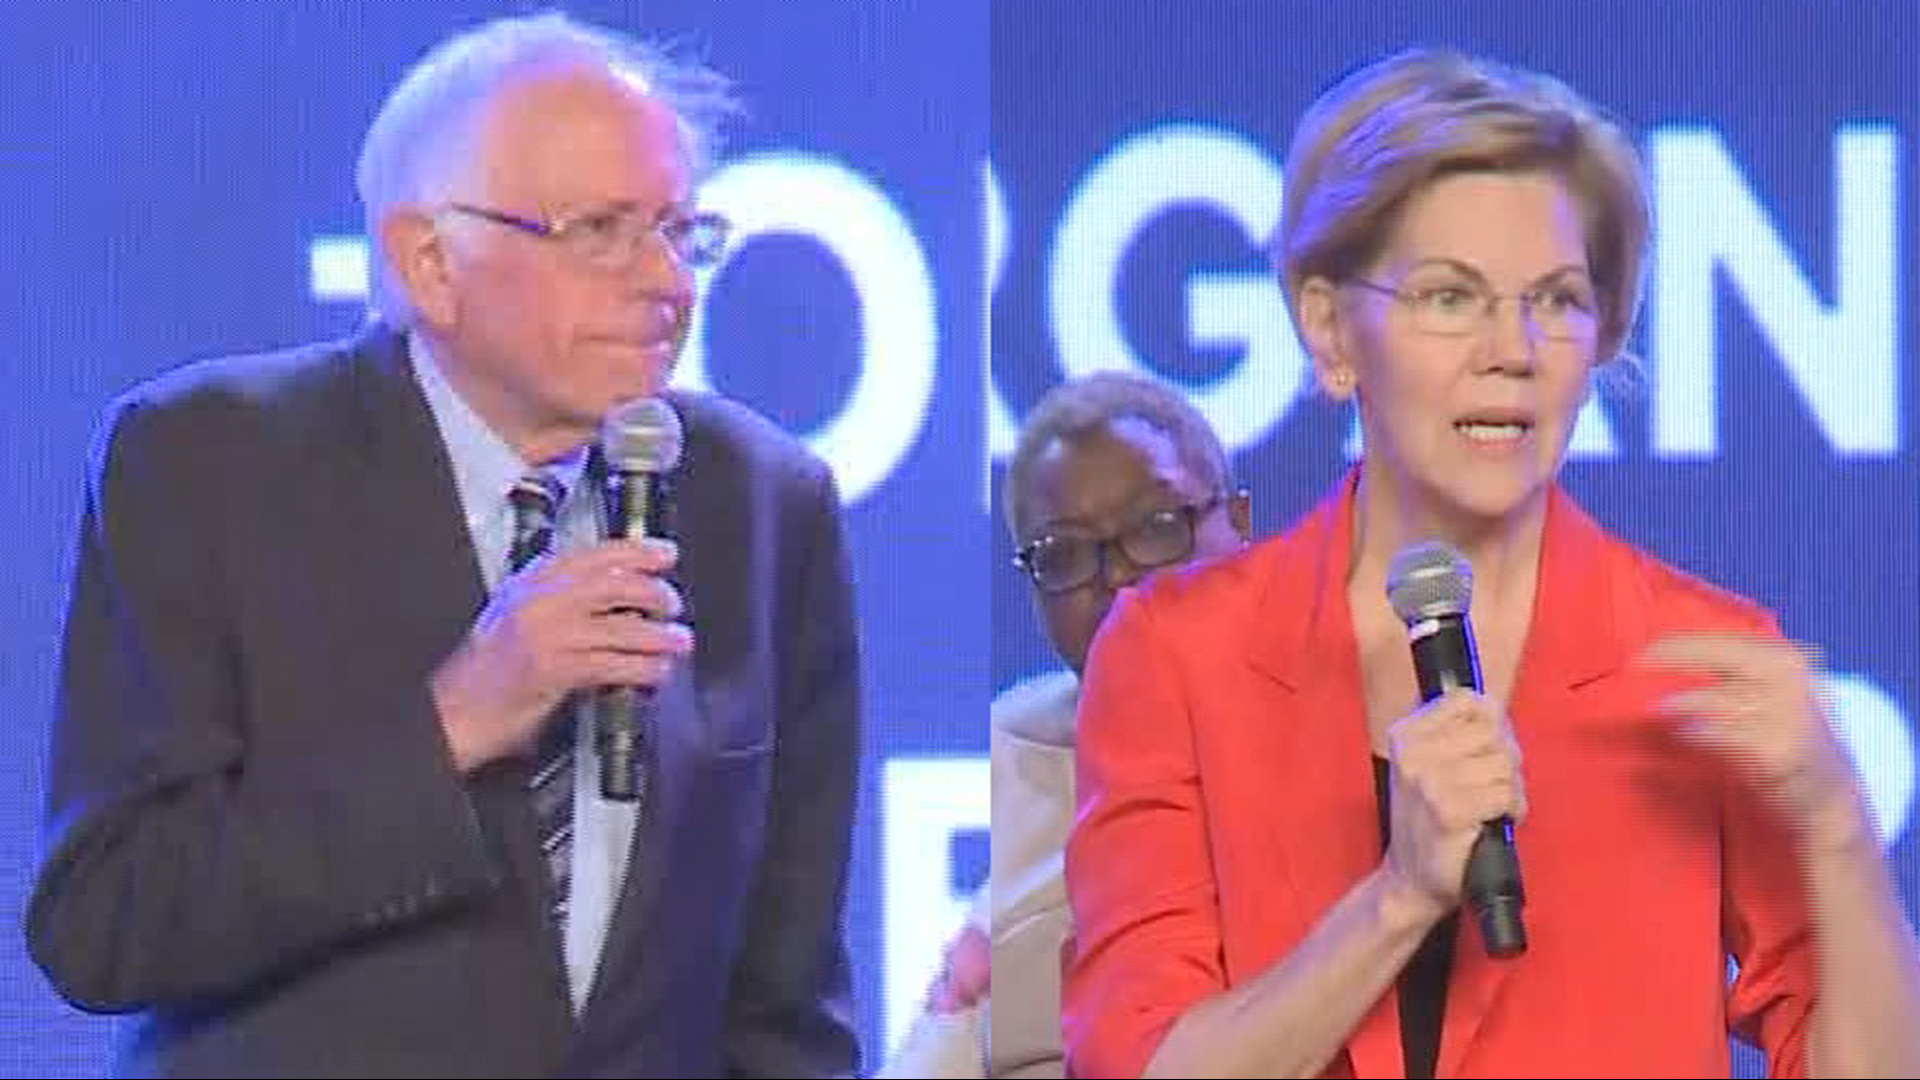 US Senators and Democratic presidential candidates Bernie Sanders and Elizabeth Warren spoke to the Black Church PAC's Youth Leadership Conference in Atlanta on Saturday morning. The candidates asked the millennials for their votes and explained why they should be chosen as the future leader of the nation.